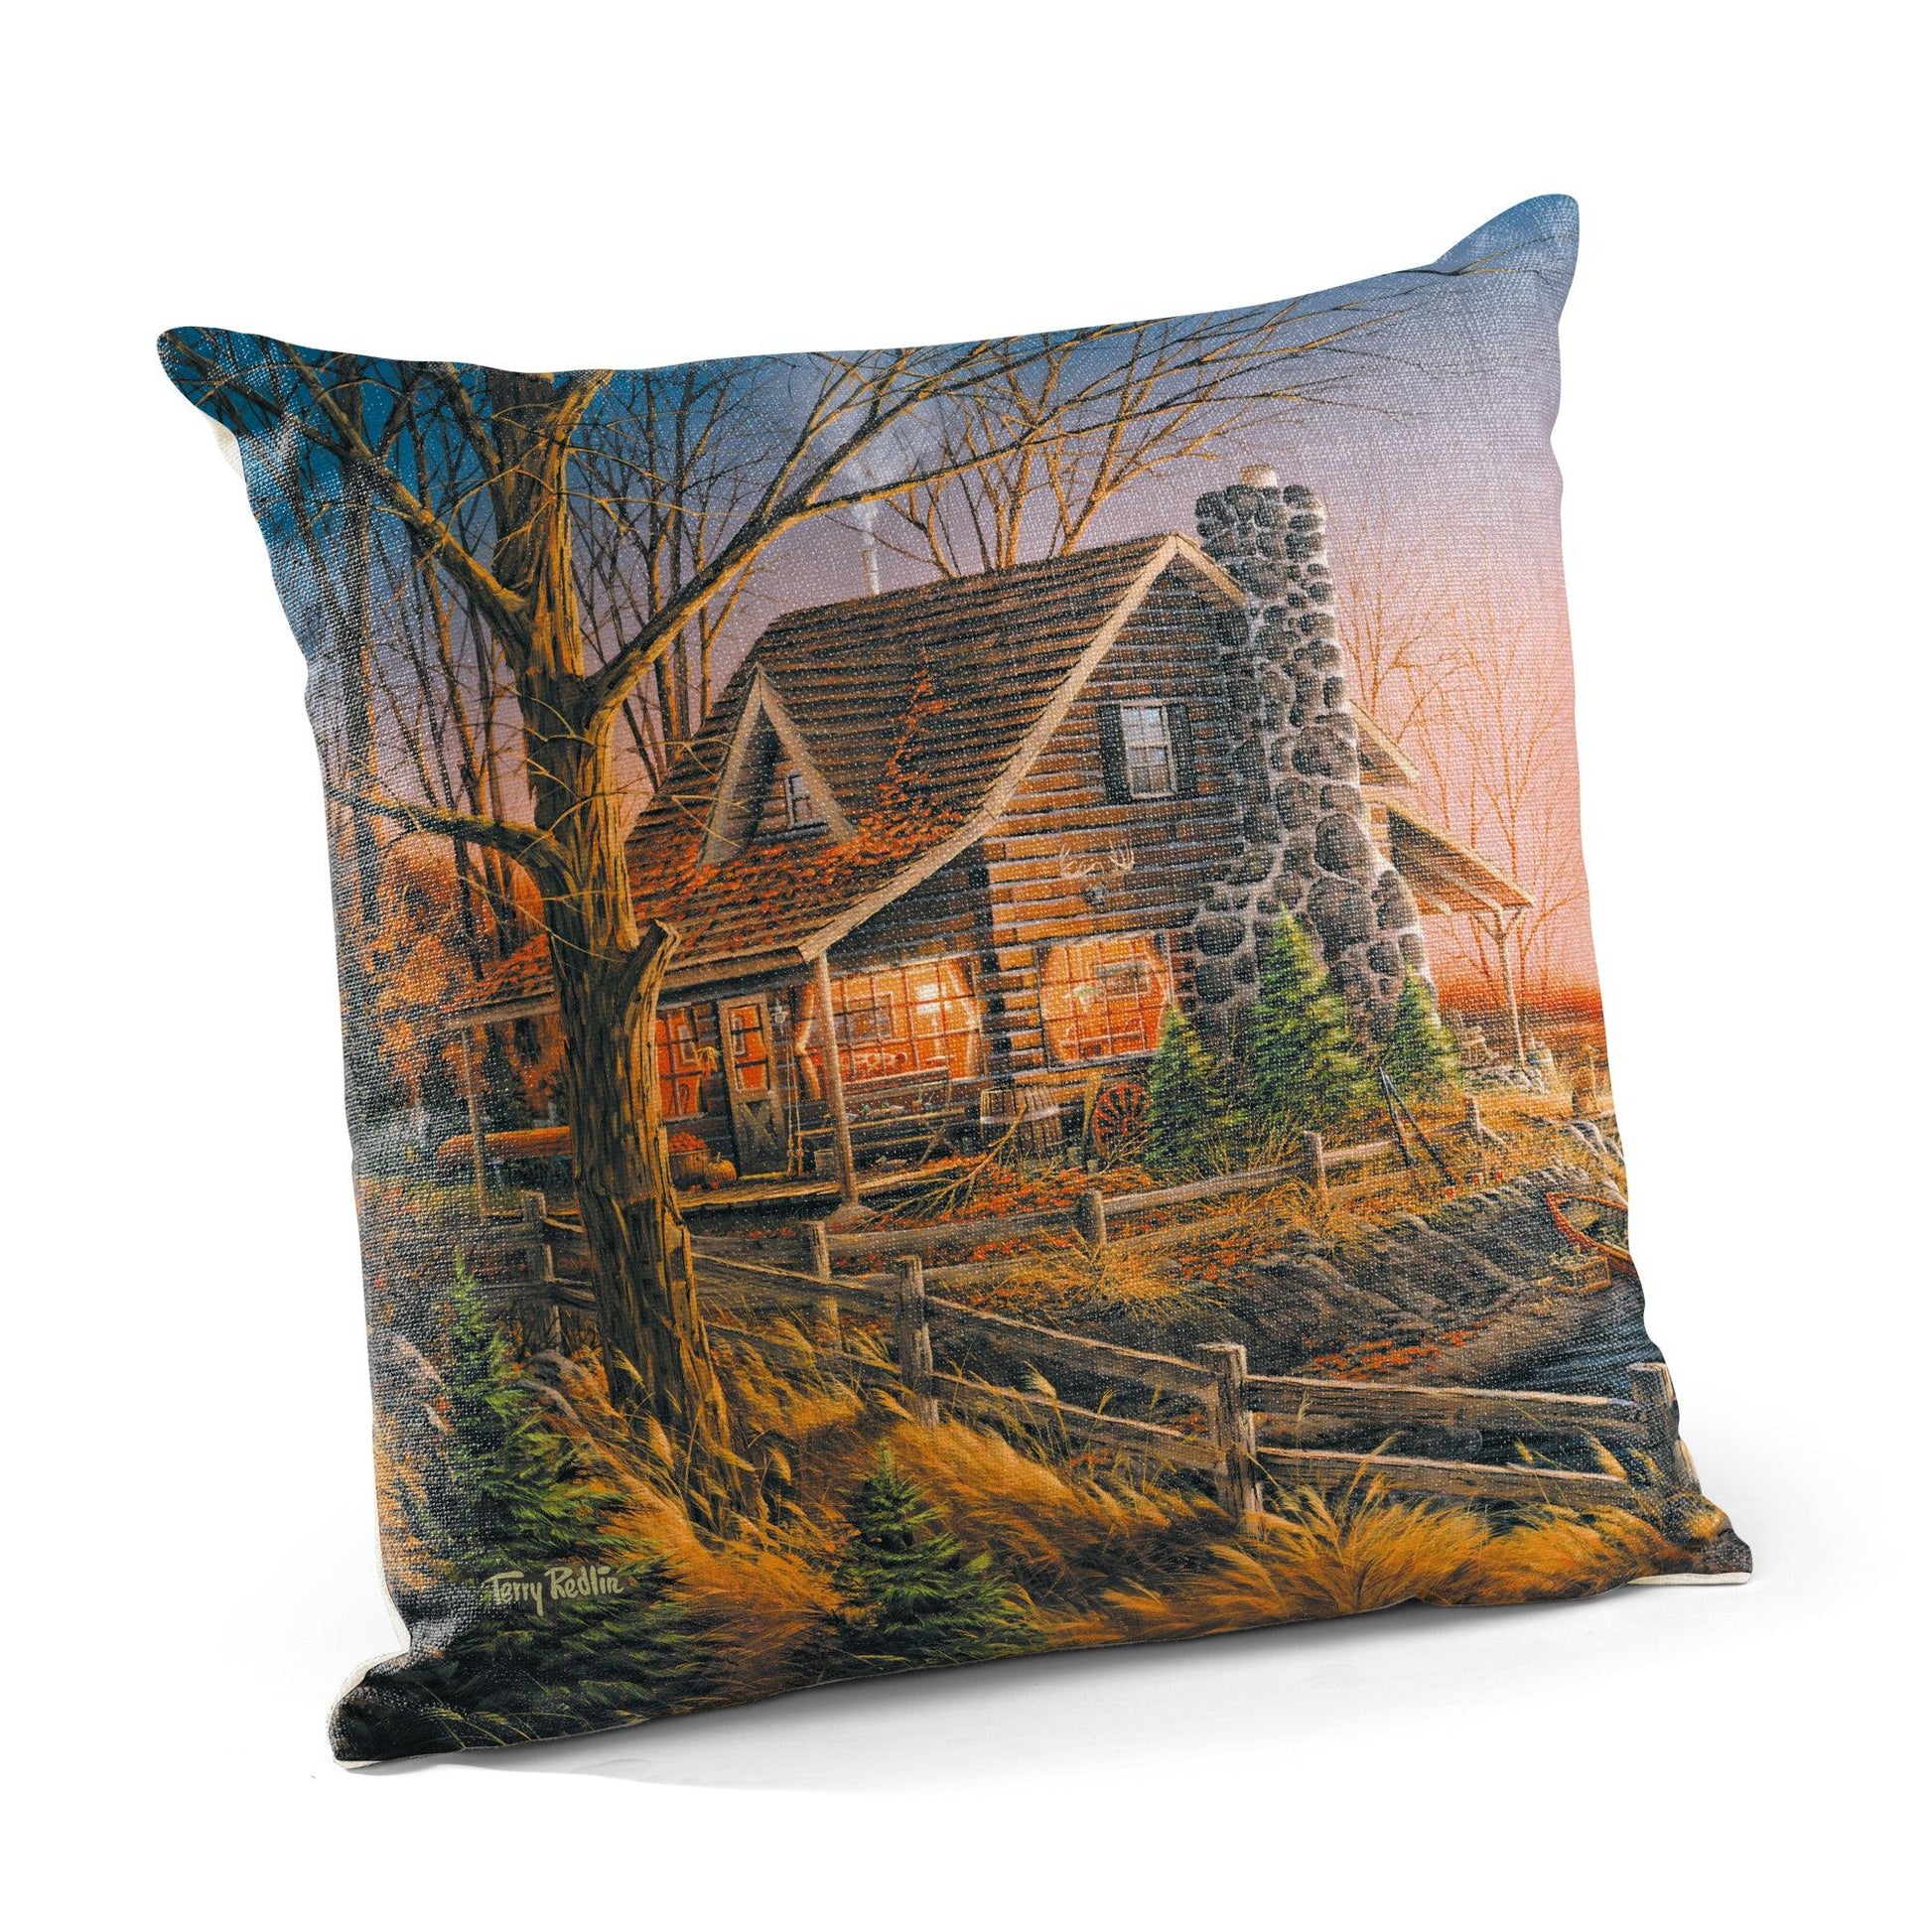 Comforts of Home 18" Decorative Pillow - Wild Wings